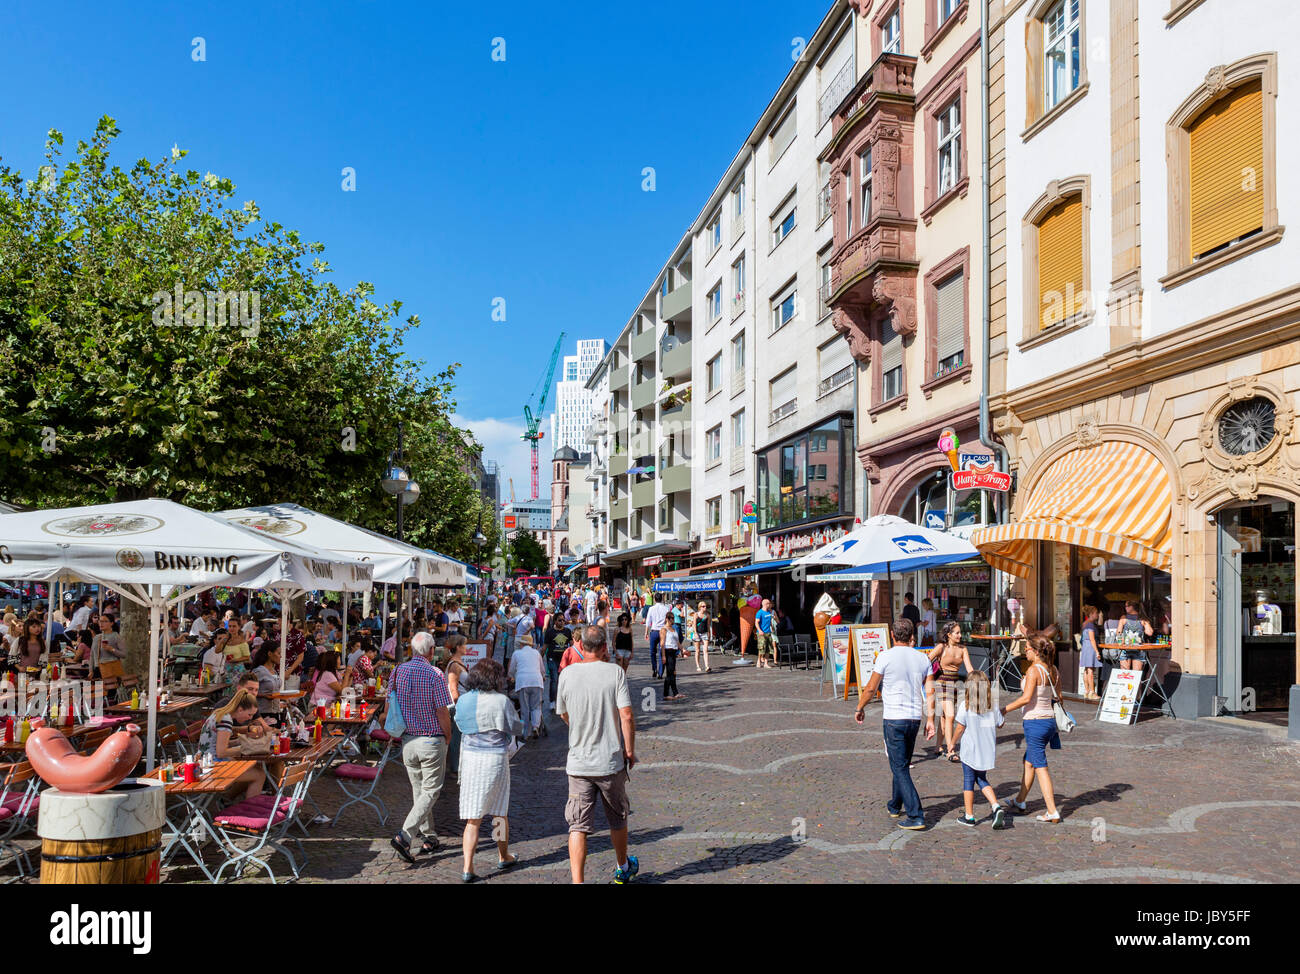 Cafe and shops on Neue KrÃ¤me in the Altstadt (Old Town), Frankfurt, Germany Stock Photo